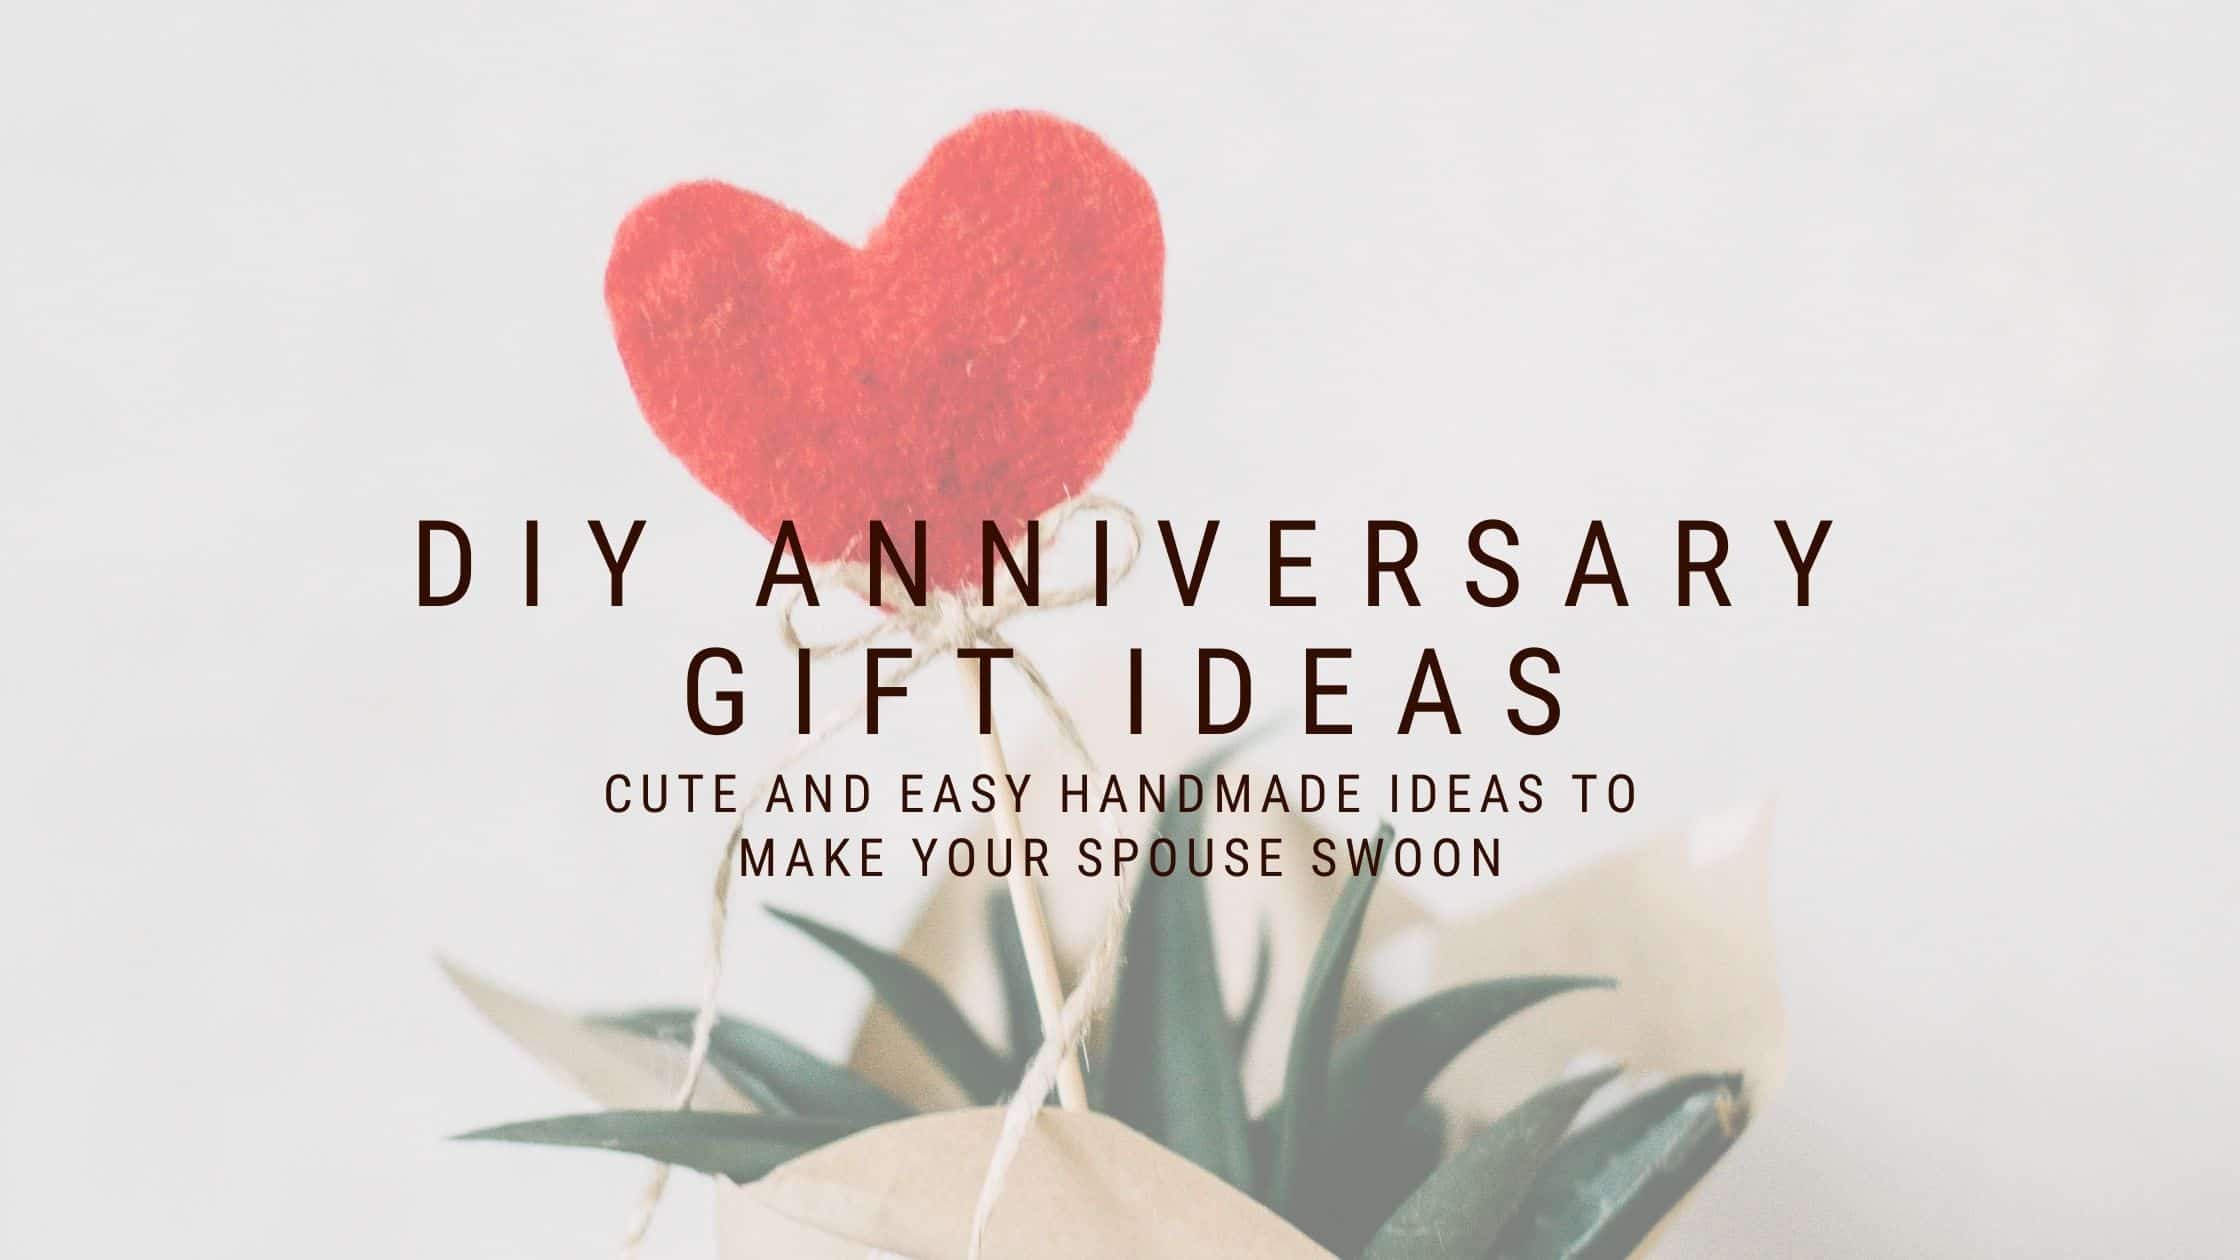 The Best 35-Year Anniversary Gift Ideas - 2021 Edition